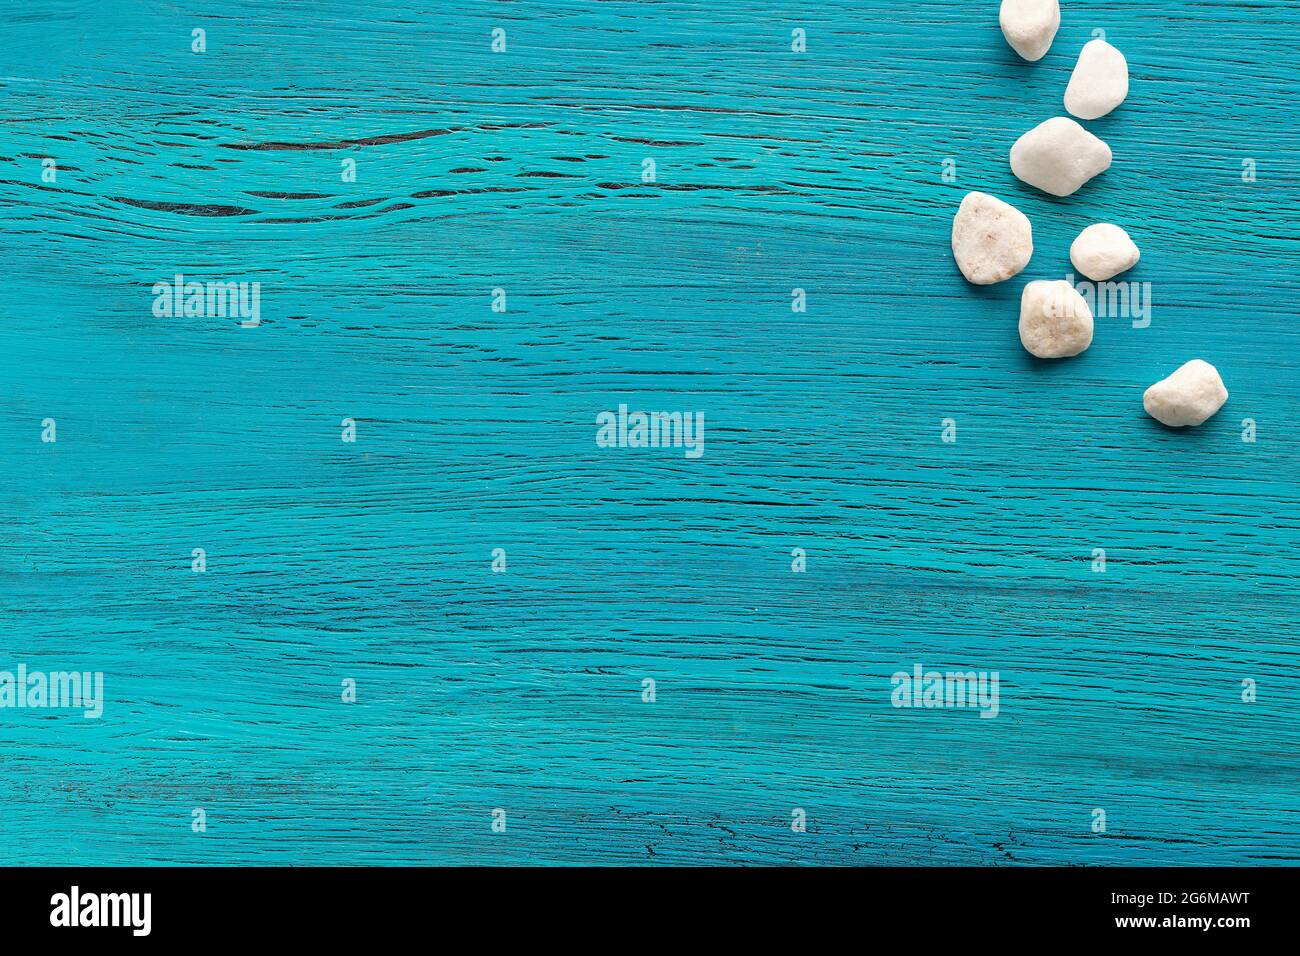 Abstract grungy blue wooden background with white stones. Copy-space, place for text. Flat lay, top view. Stock Photo